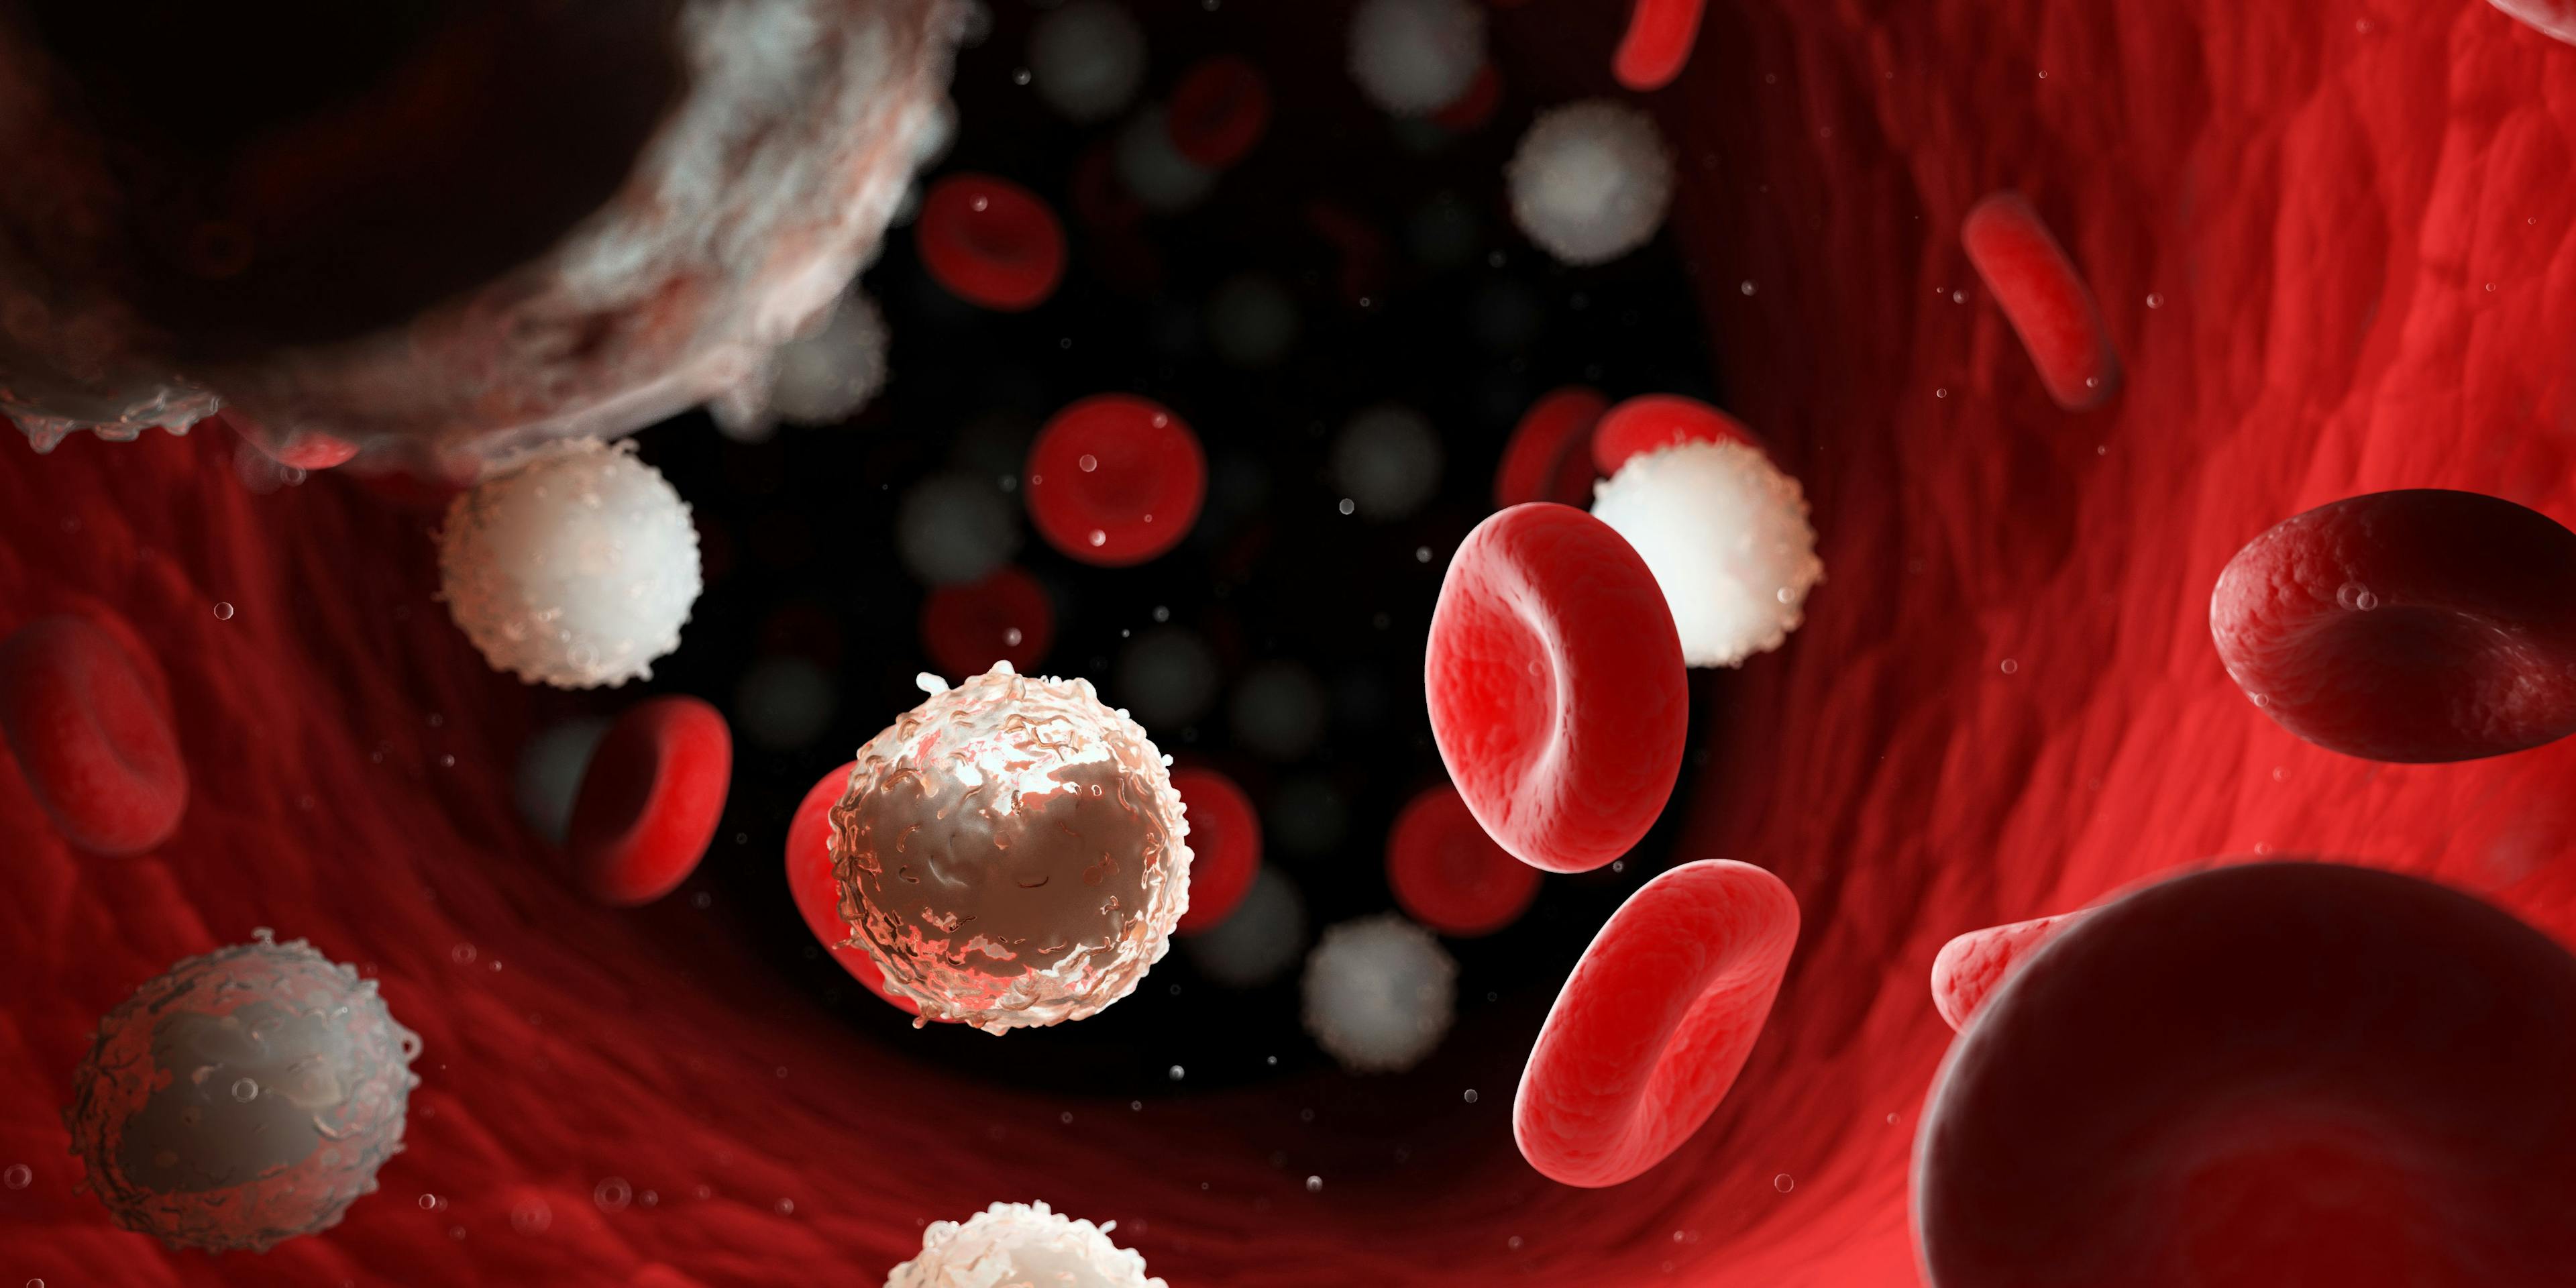 Brexucabtagene Autoleucel Approved for Refractory B-Cell Acute Lymphoblastic Leukemia